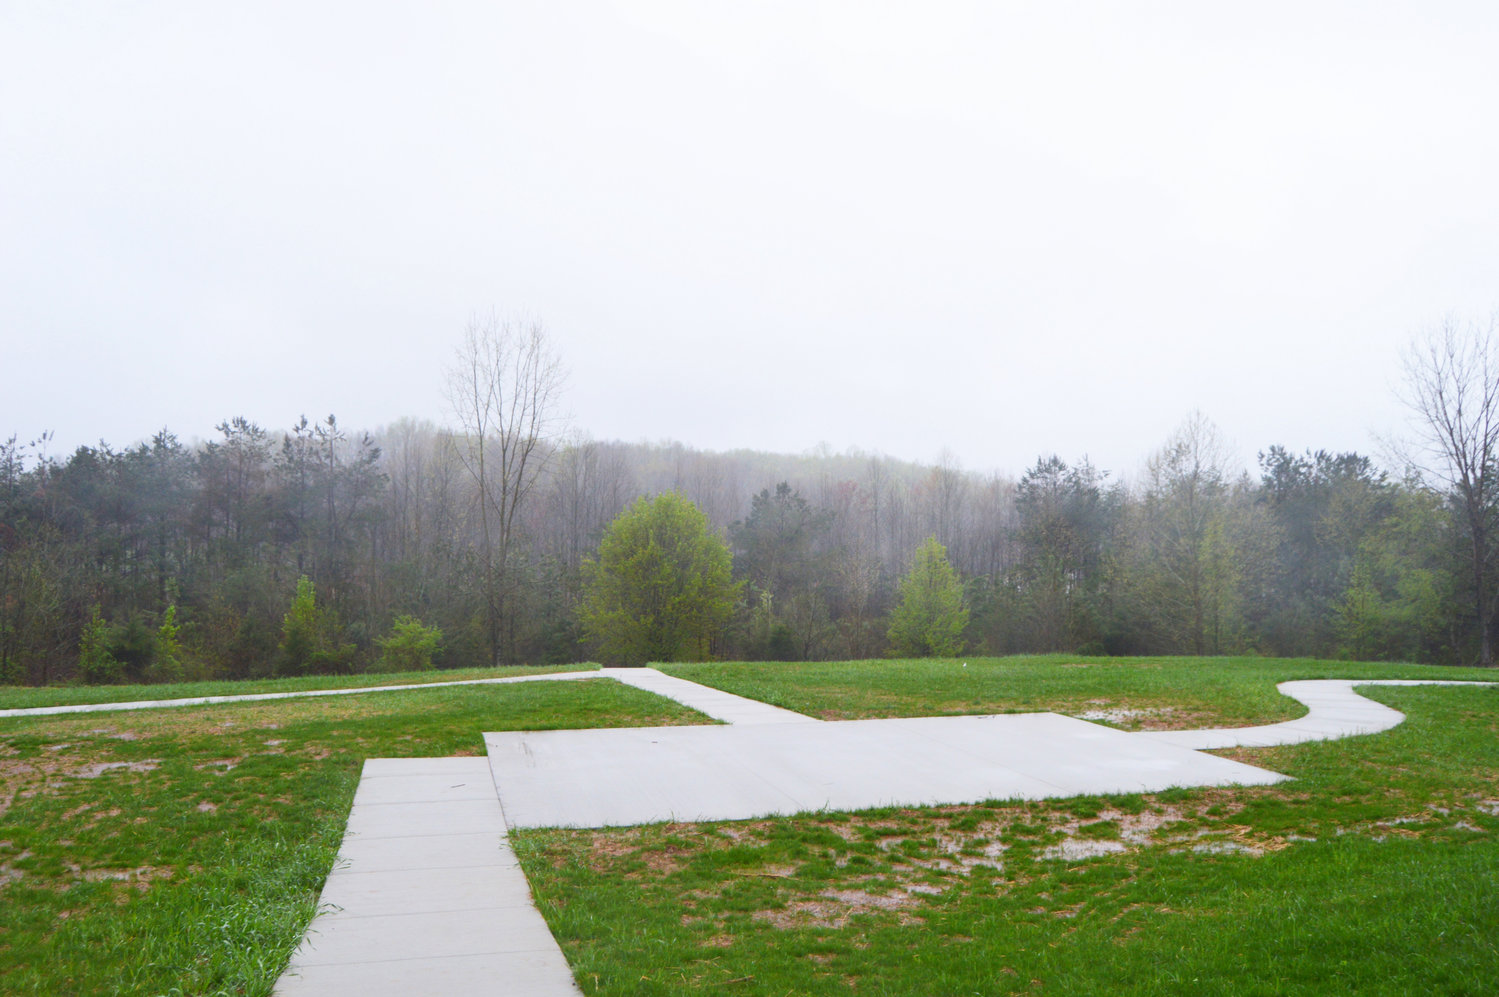 Sidewalks are complete for the 1.5-acre dog park being constructed at Cane Creek Park. The park will include shade structures, fencing, dog agility equipment and more.